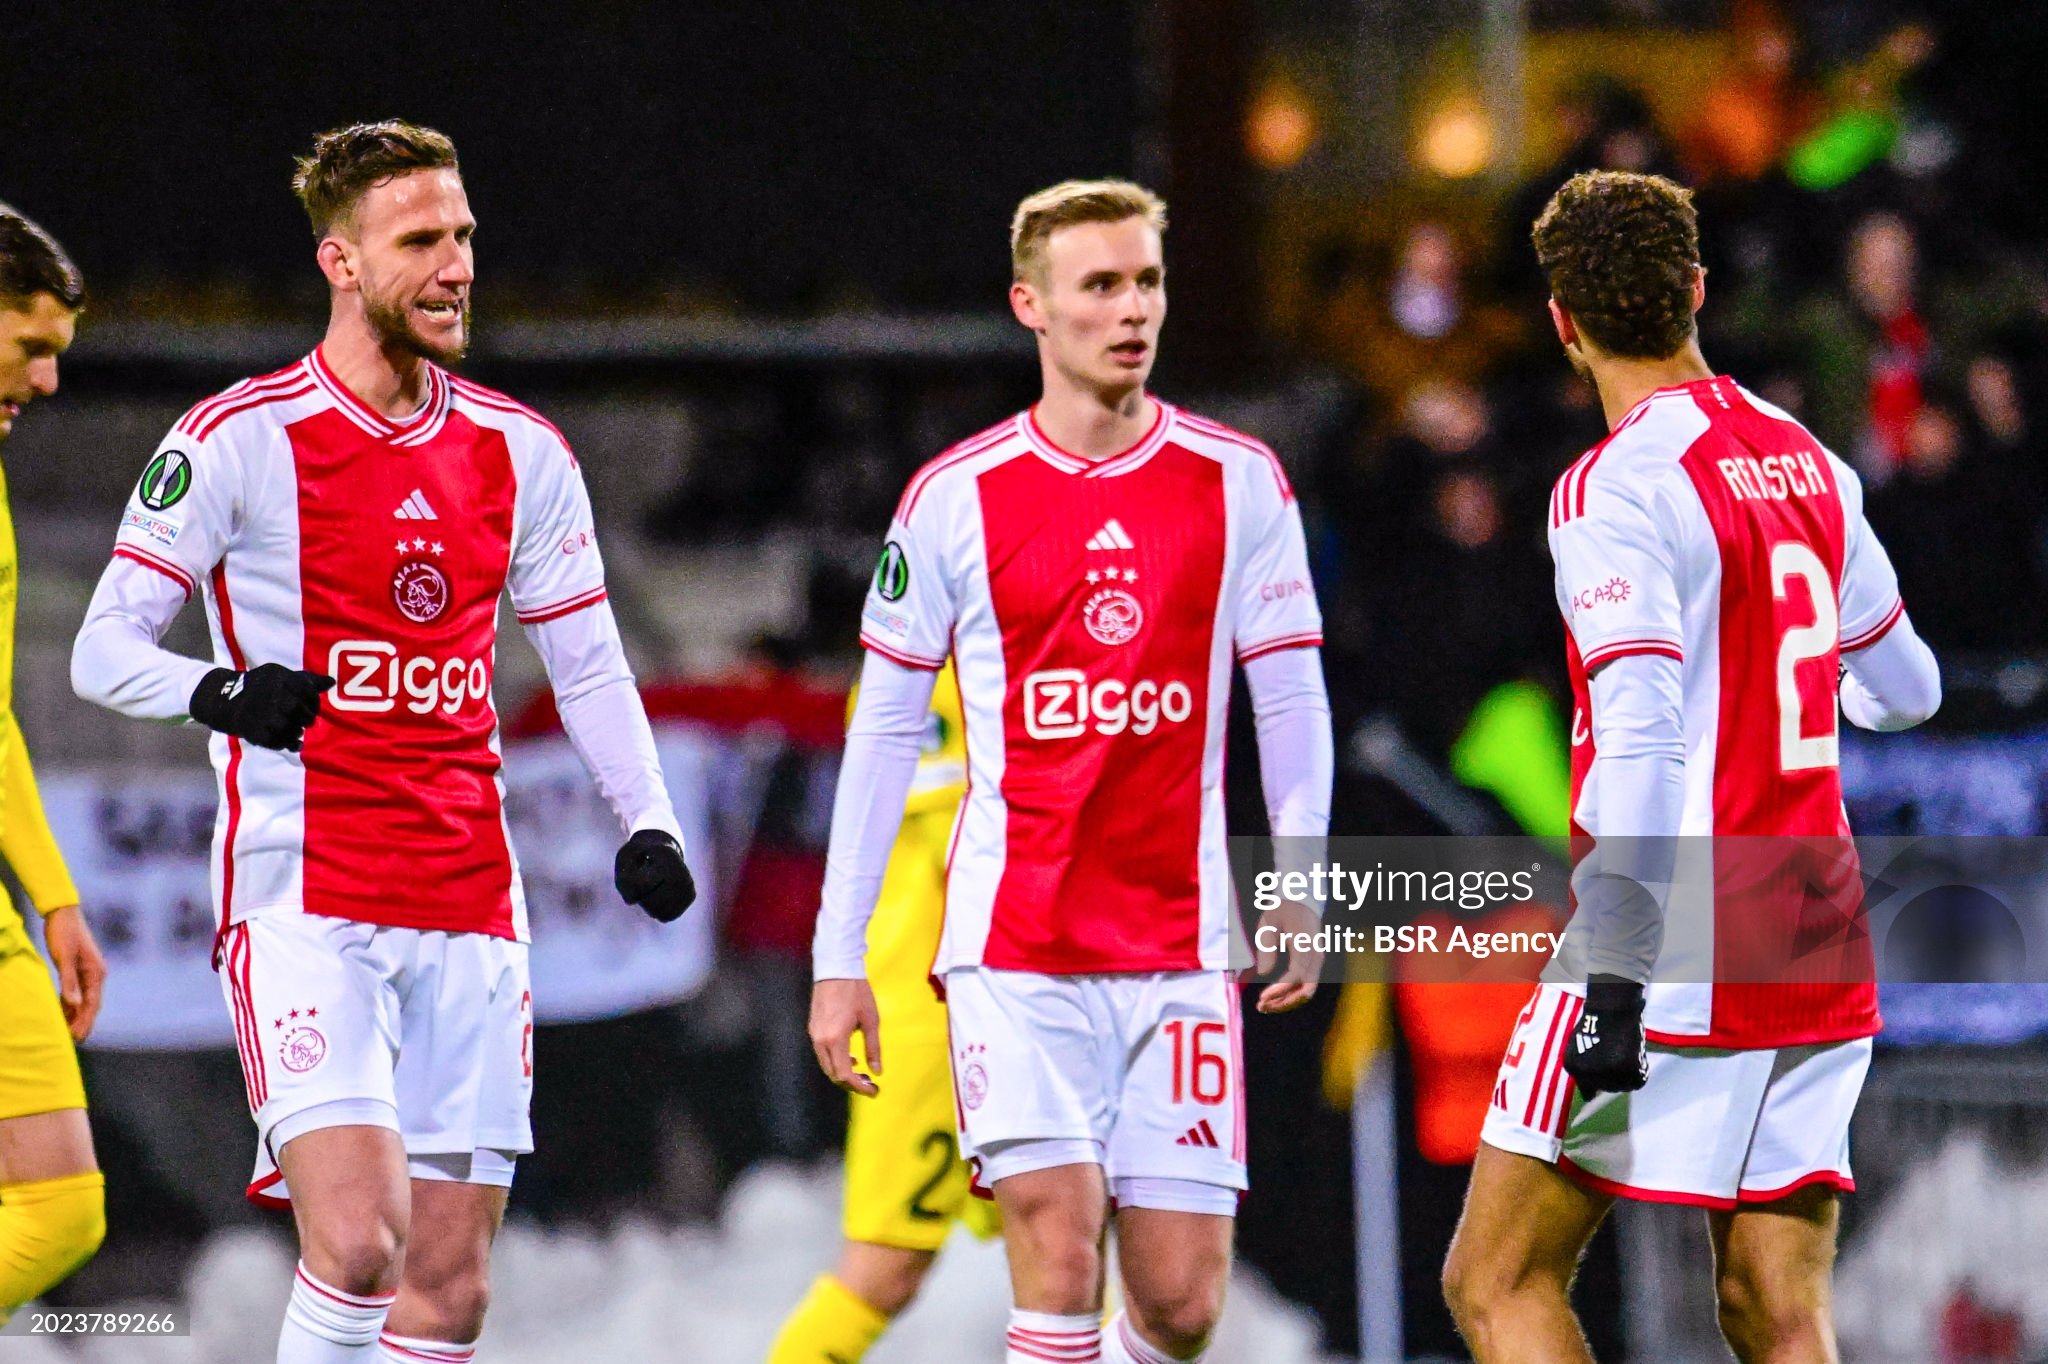 Ajax to face Aston Villa for the Conference League round of 16